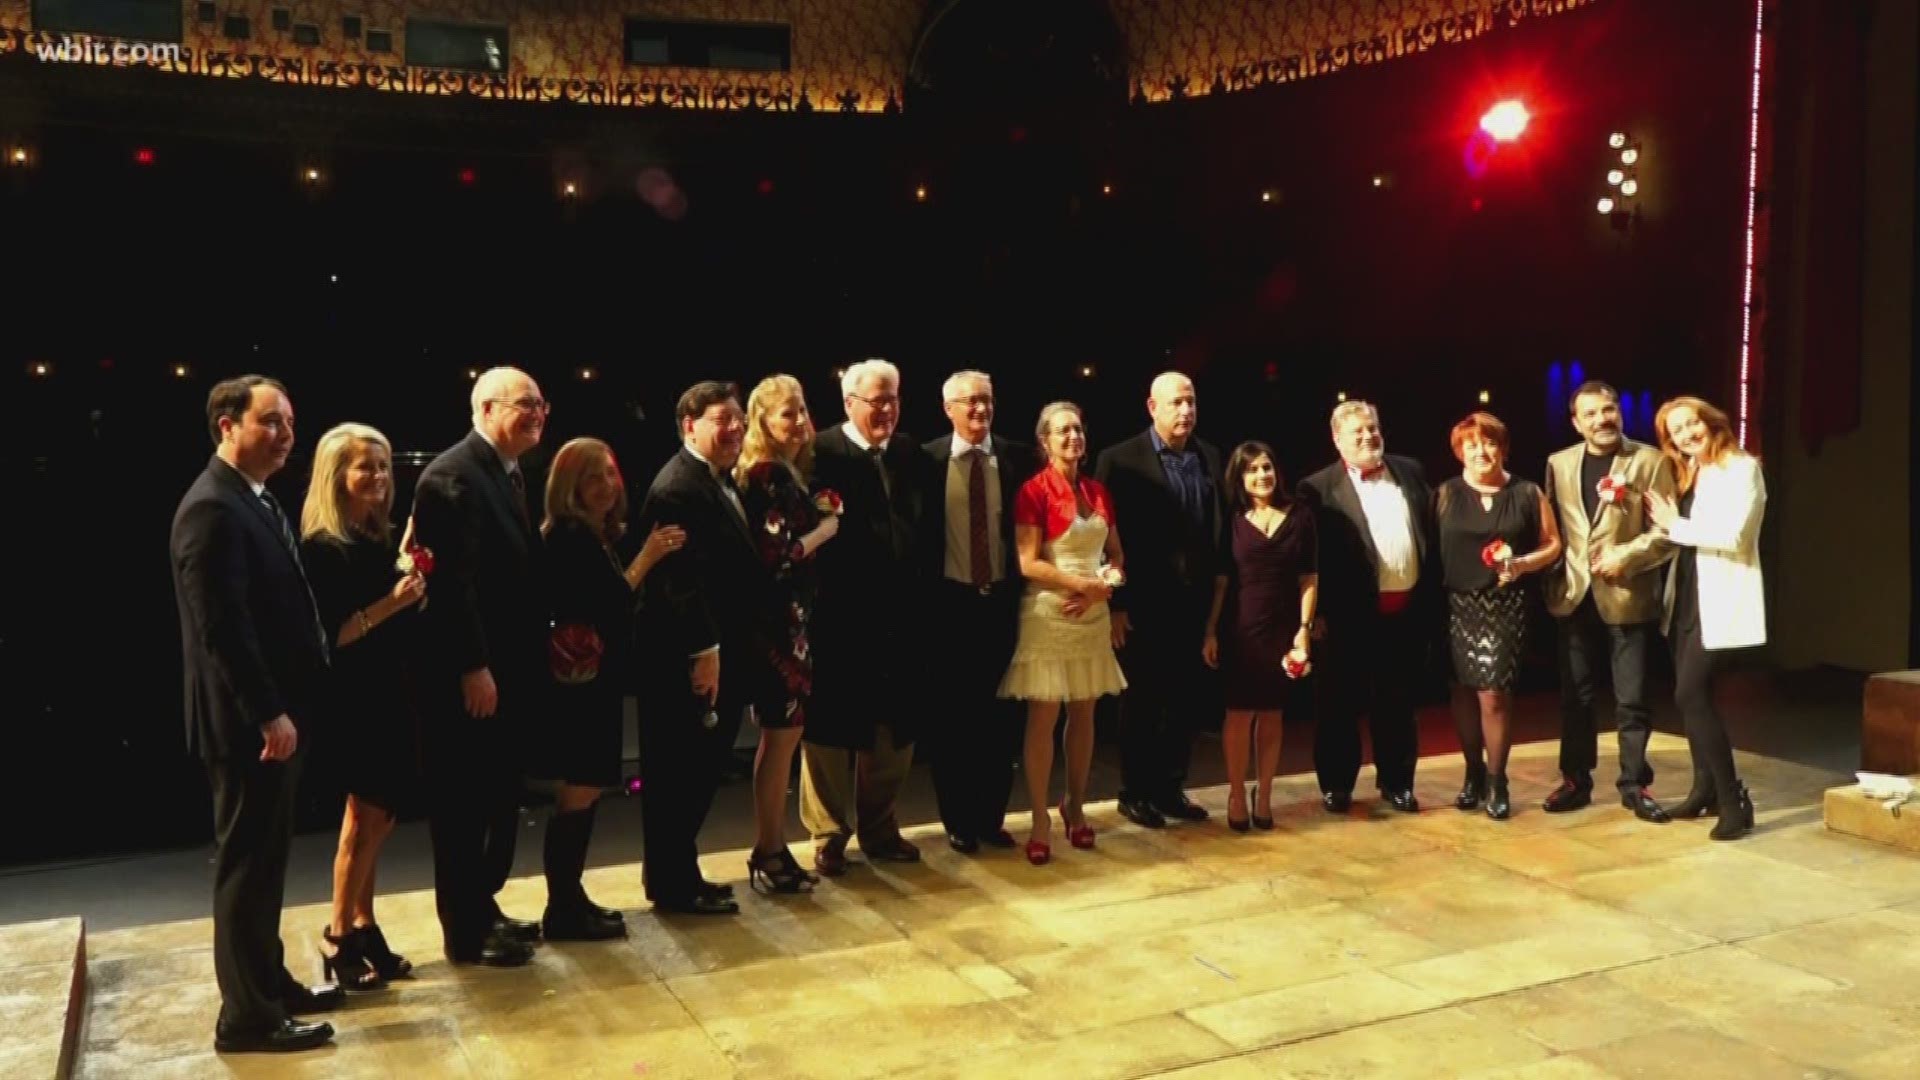 Seven couples renewed their vows on the Tennessee Theatre stage tonight.